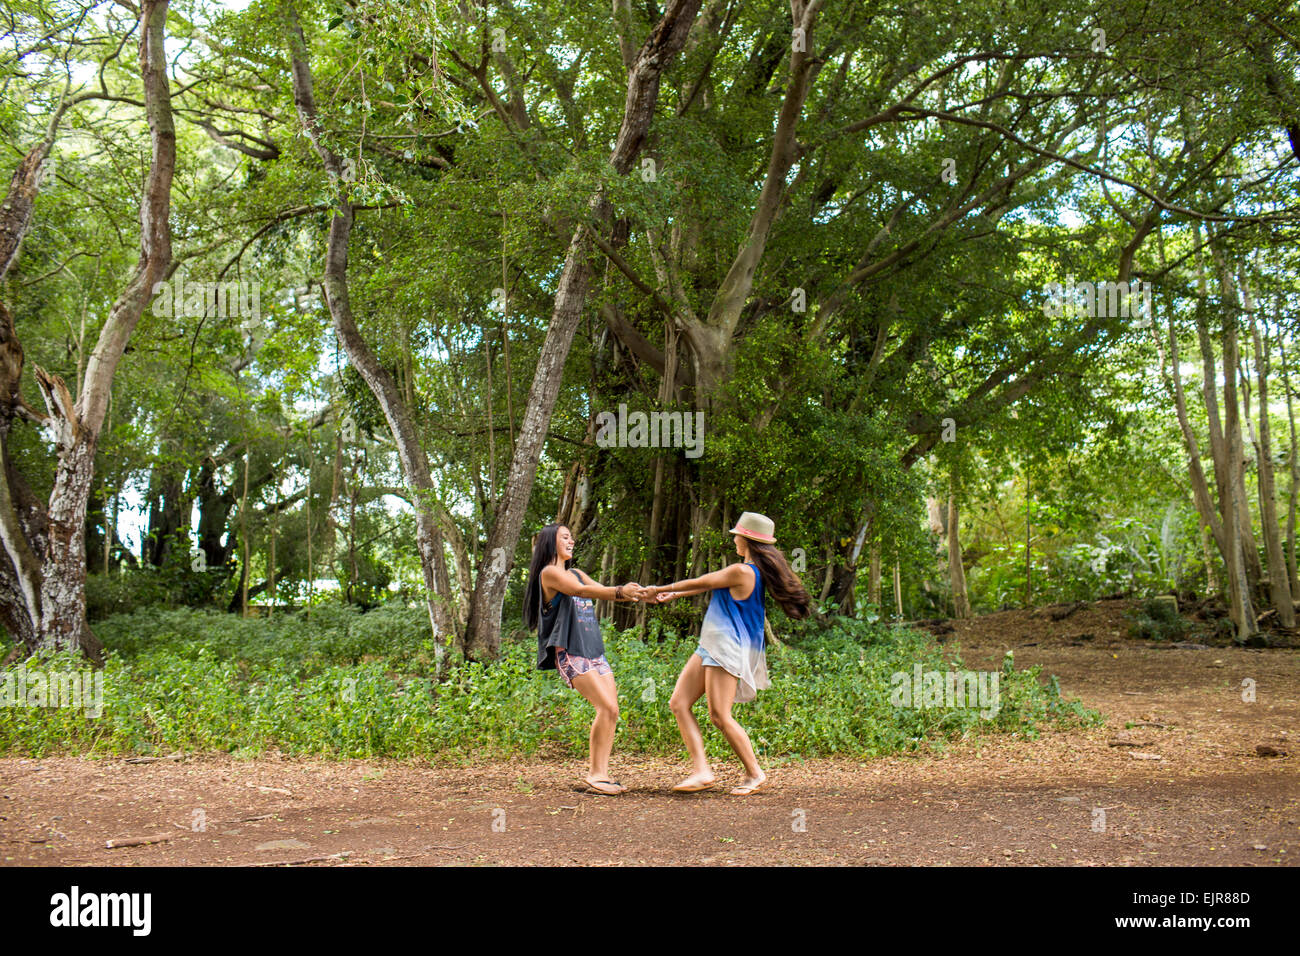 Pacific Islander women playing in forest Stock Photo